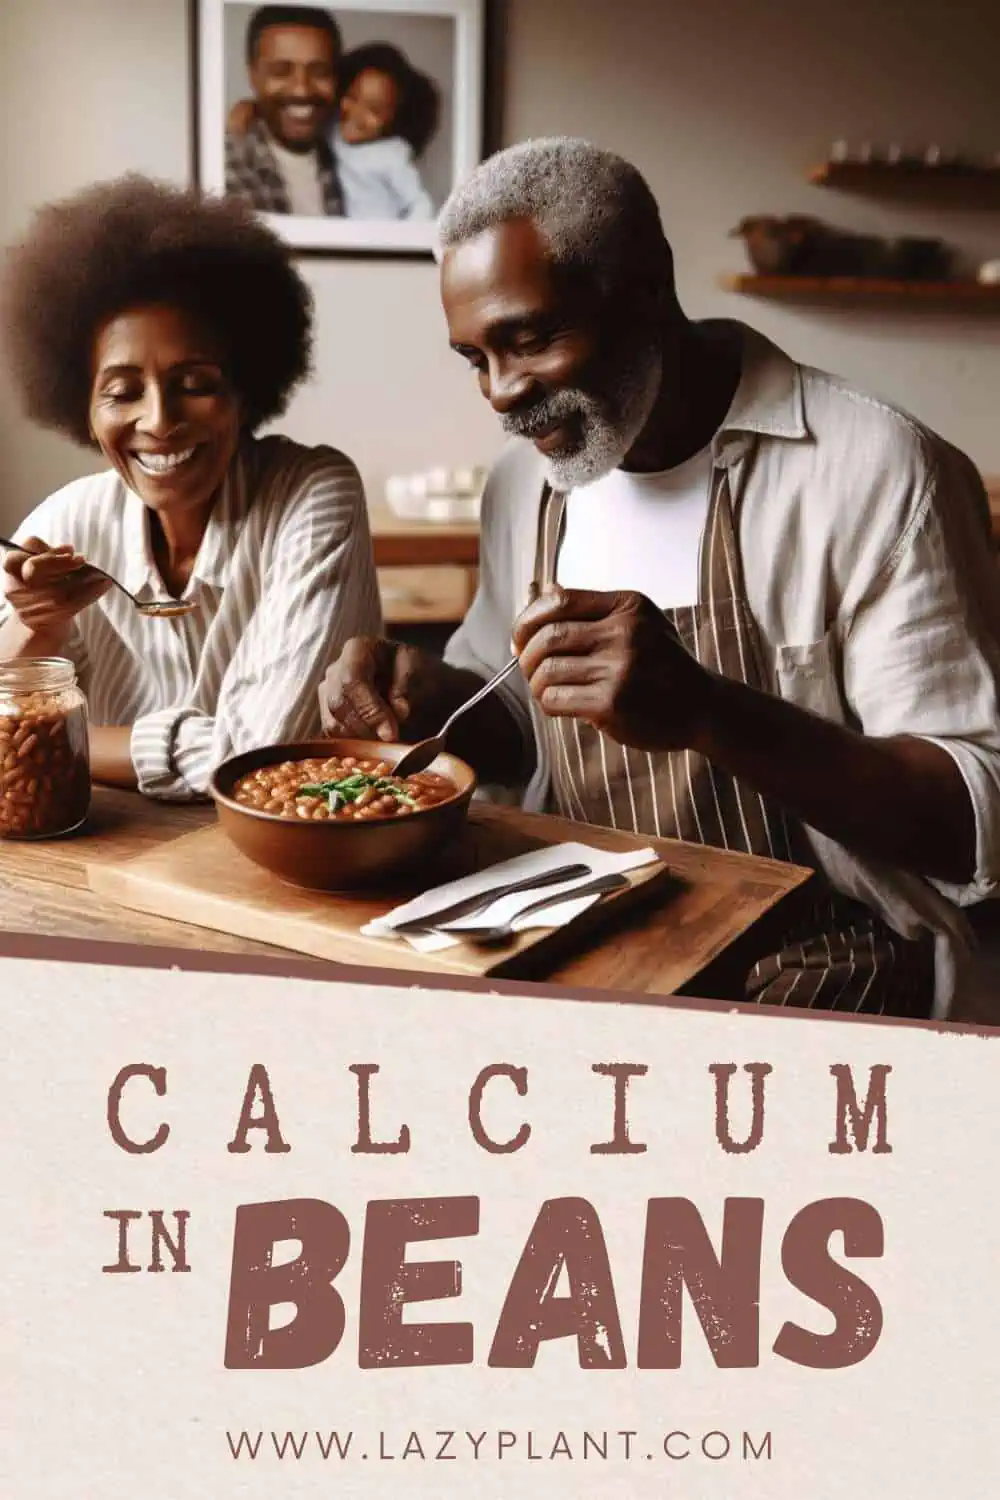 Beans are among the richest vegan foods in calcium.